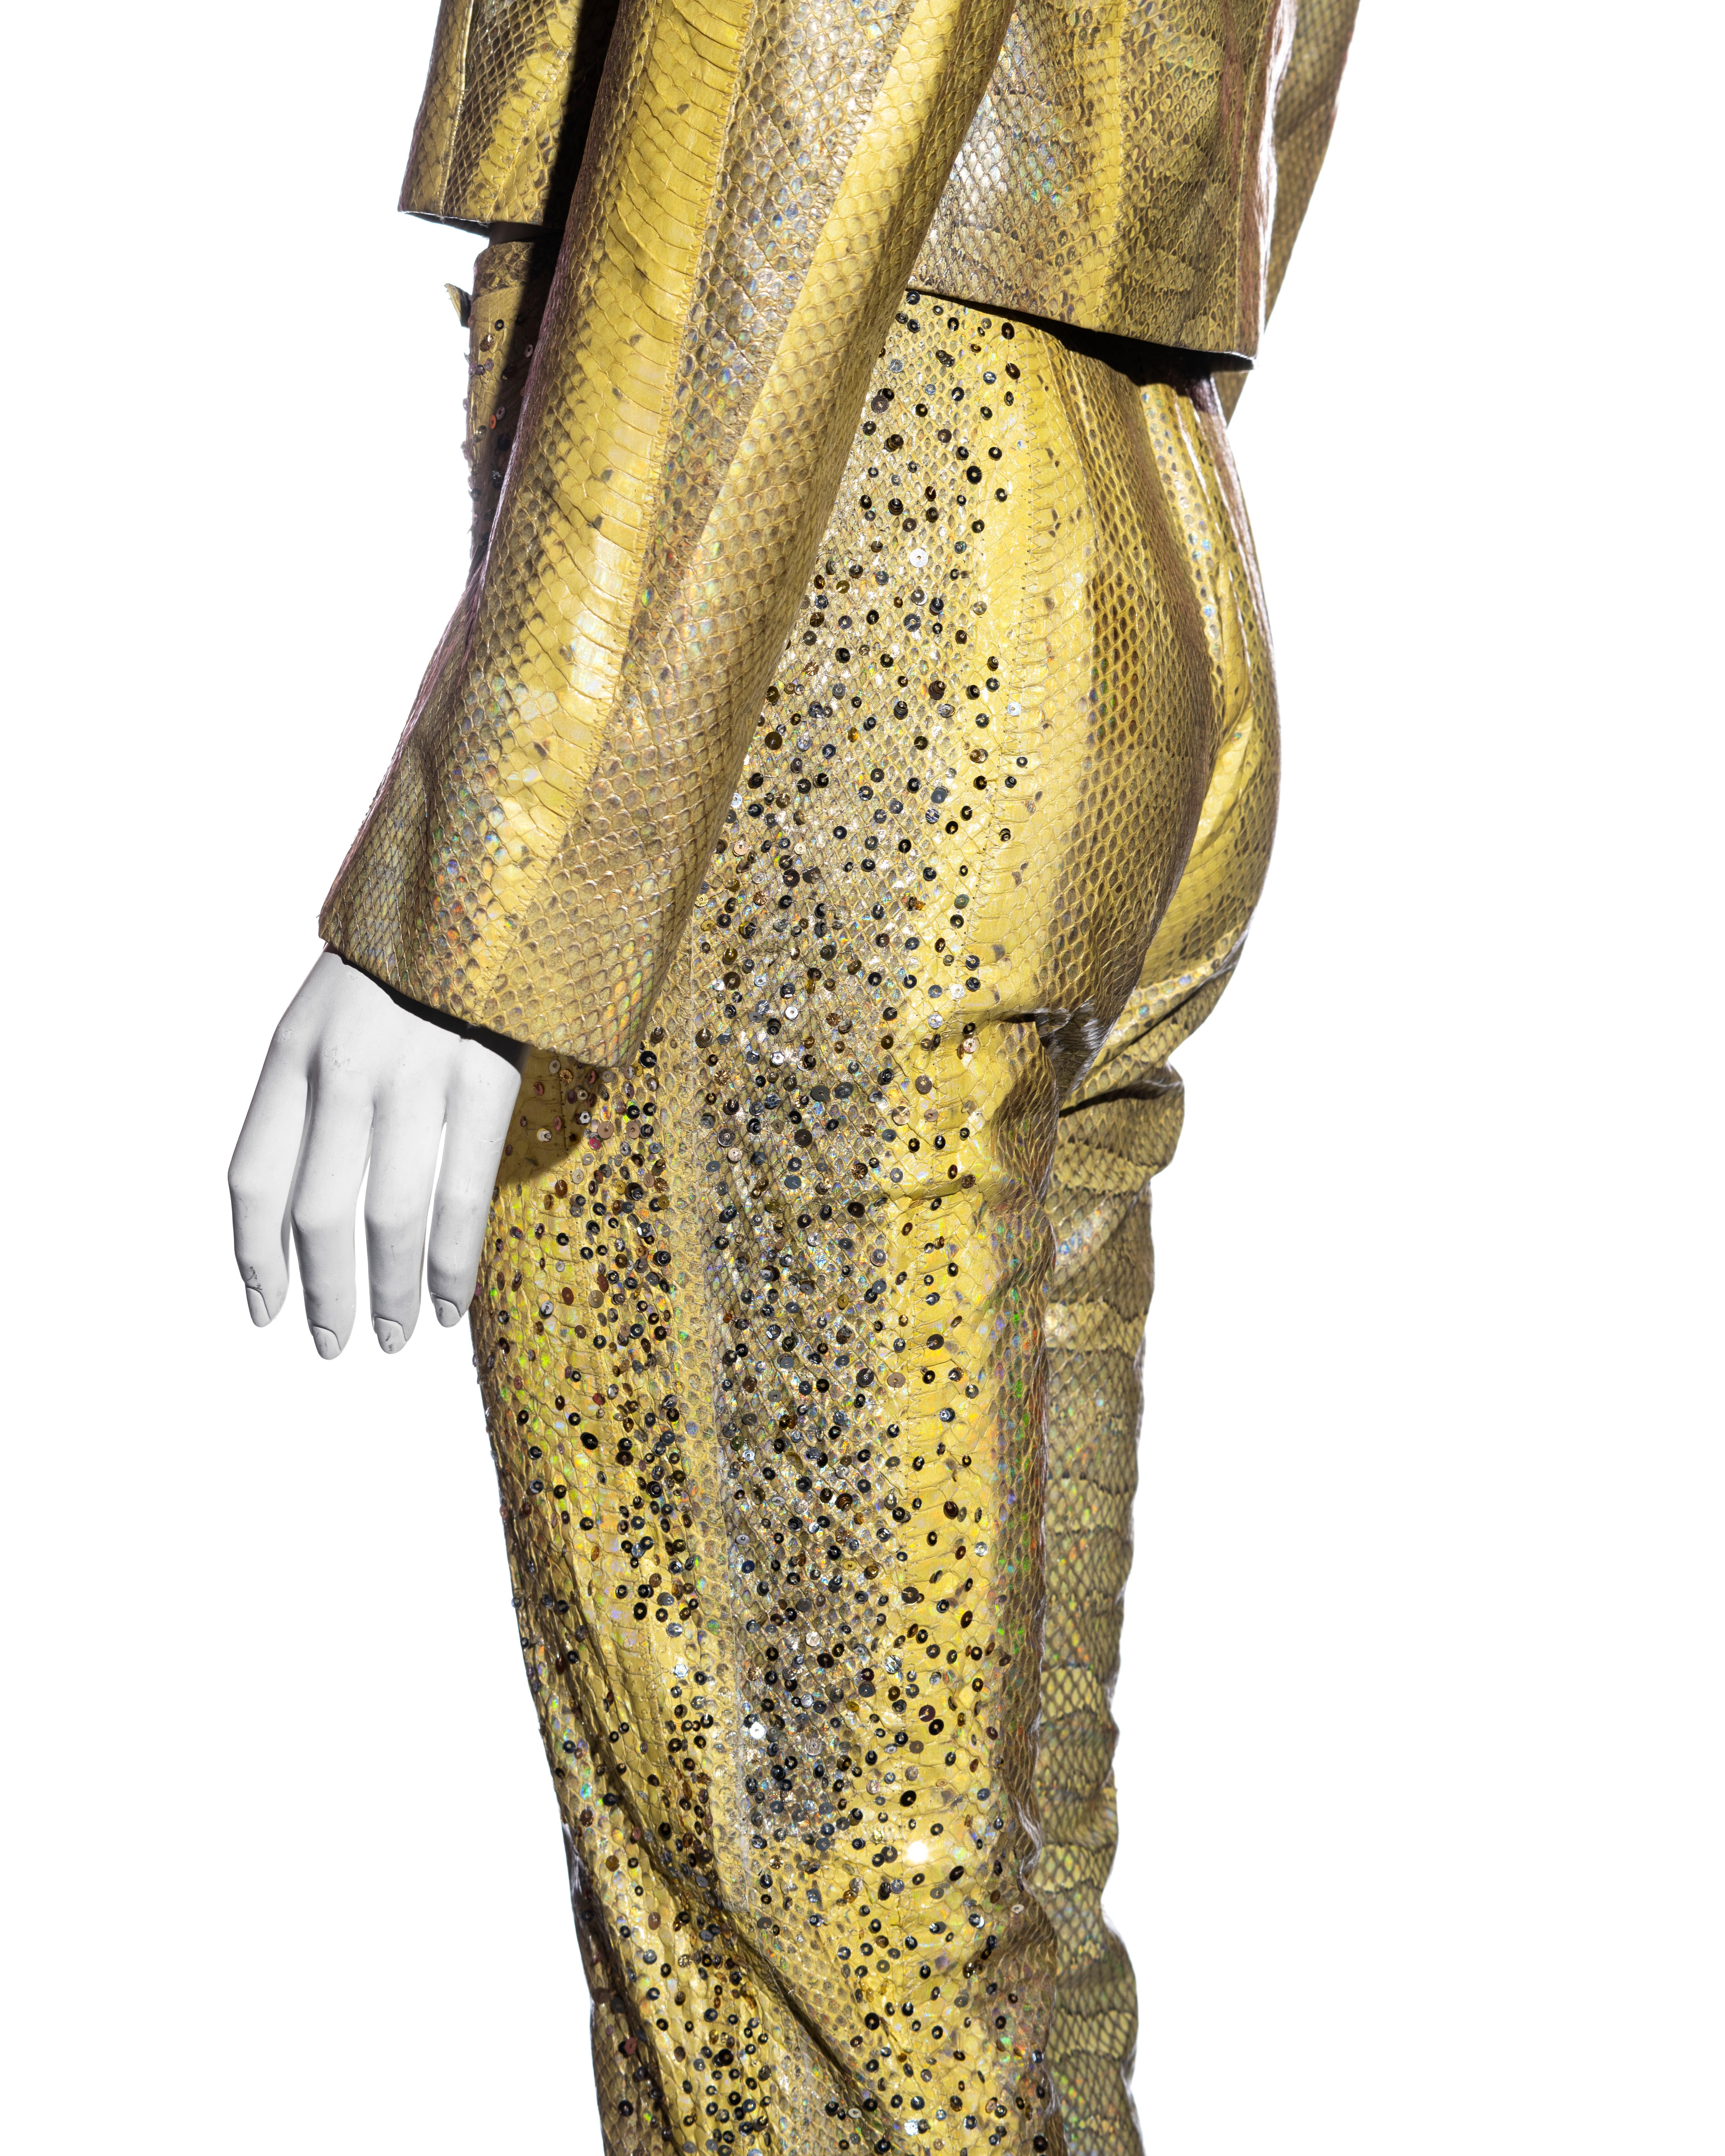 Roberto Cavalli yellow iridescent snakeskin pant suit with sequins, ss 2001 For Sale 3